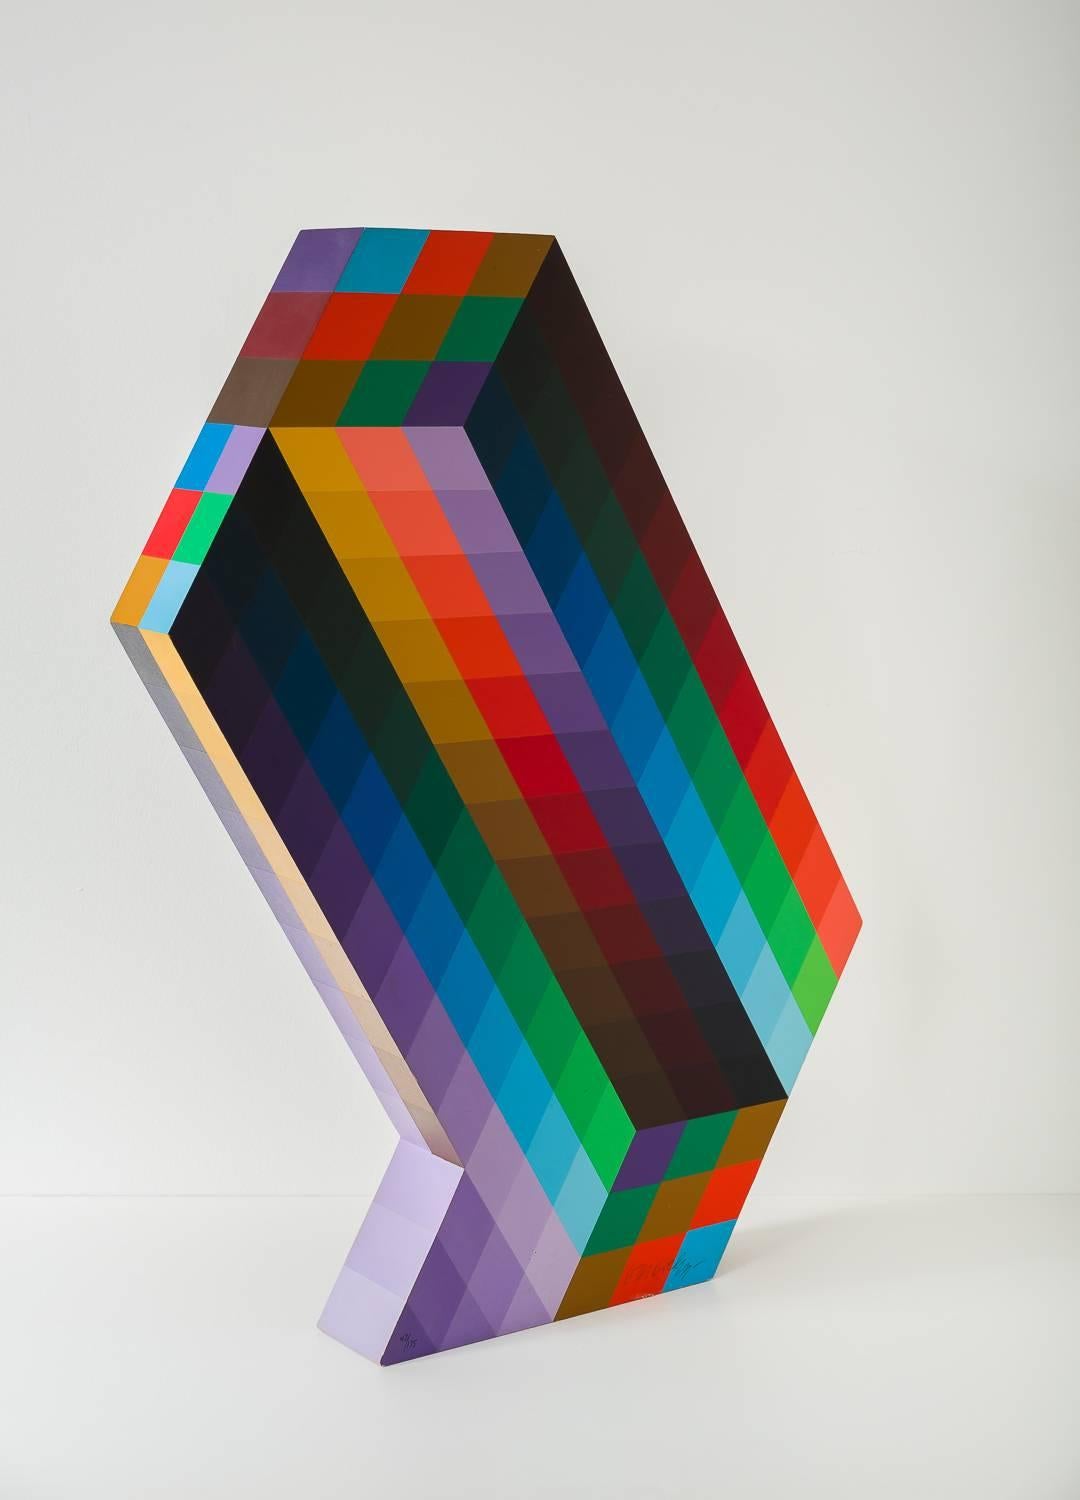 A sculpture by Victor Vasarely. 